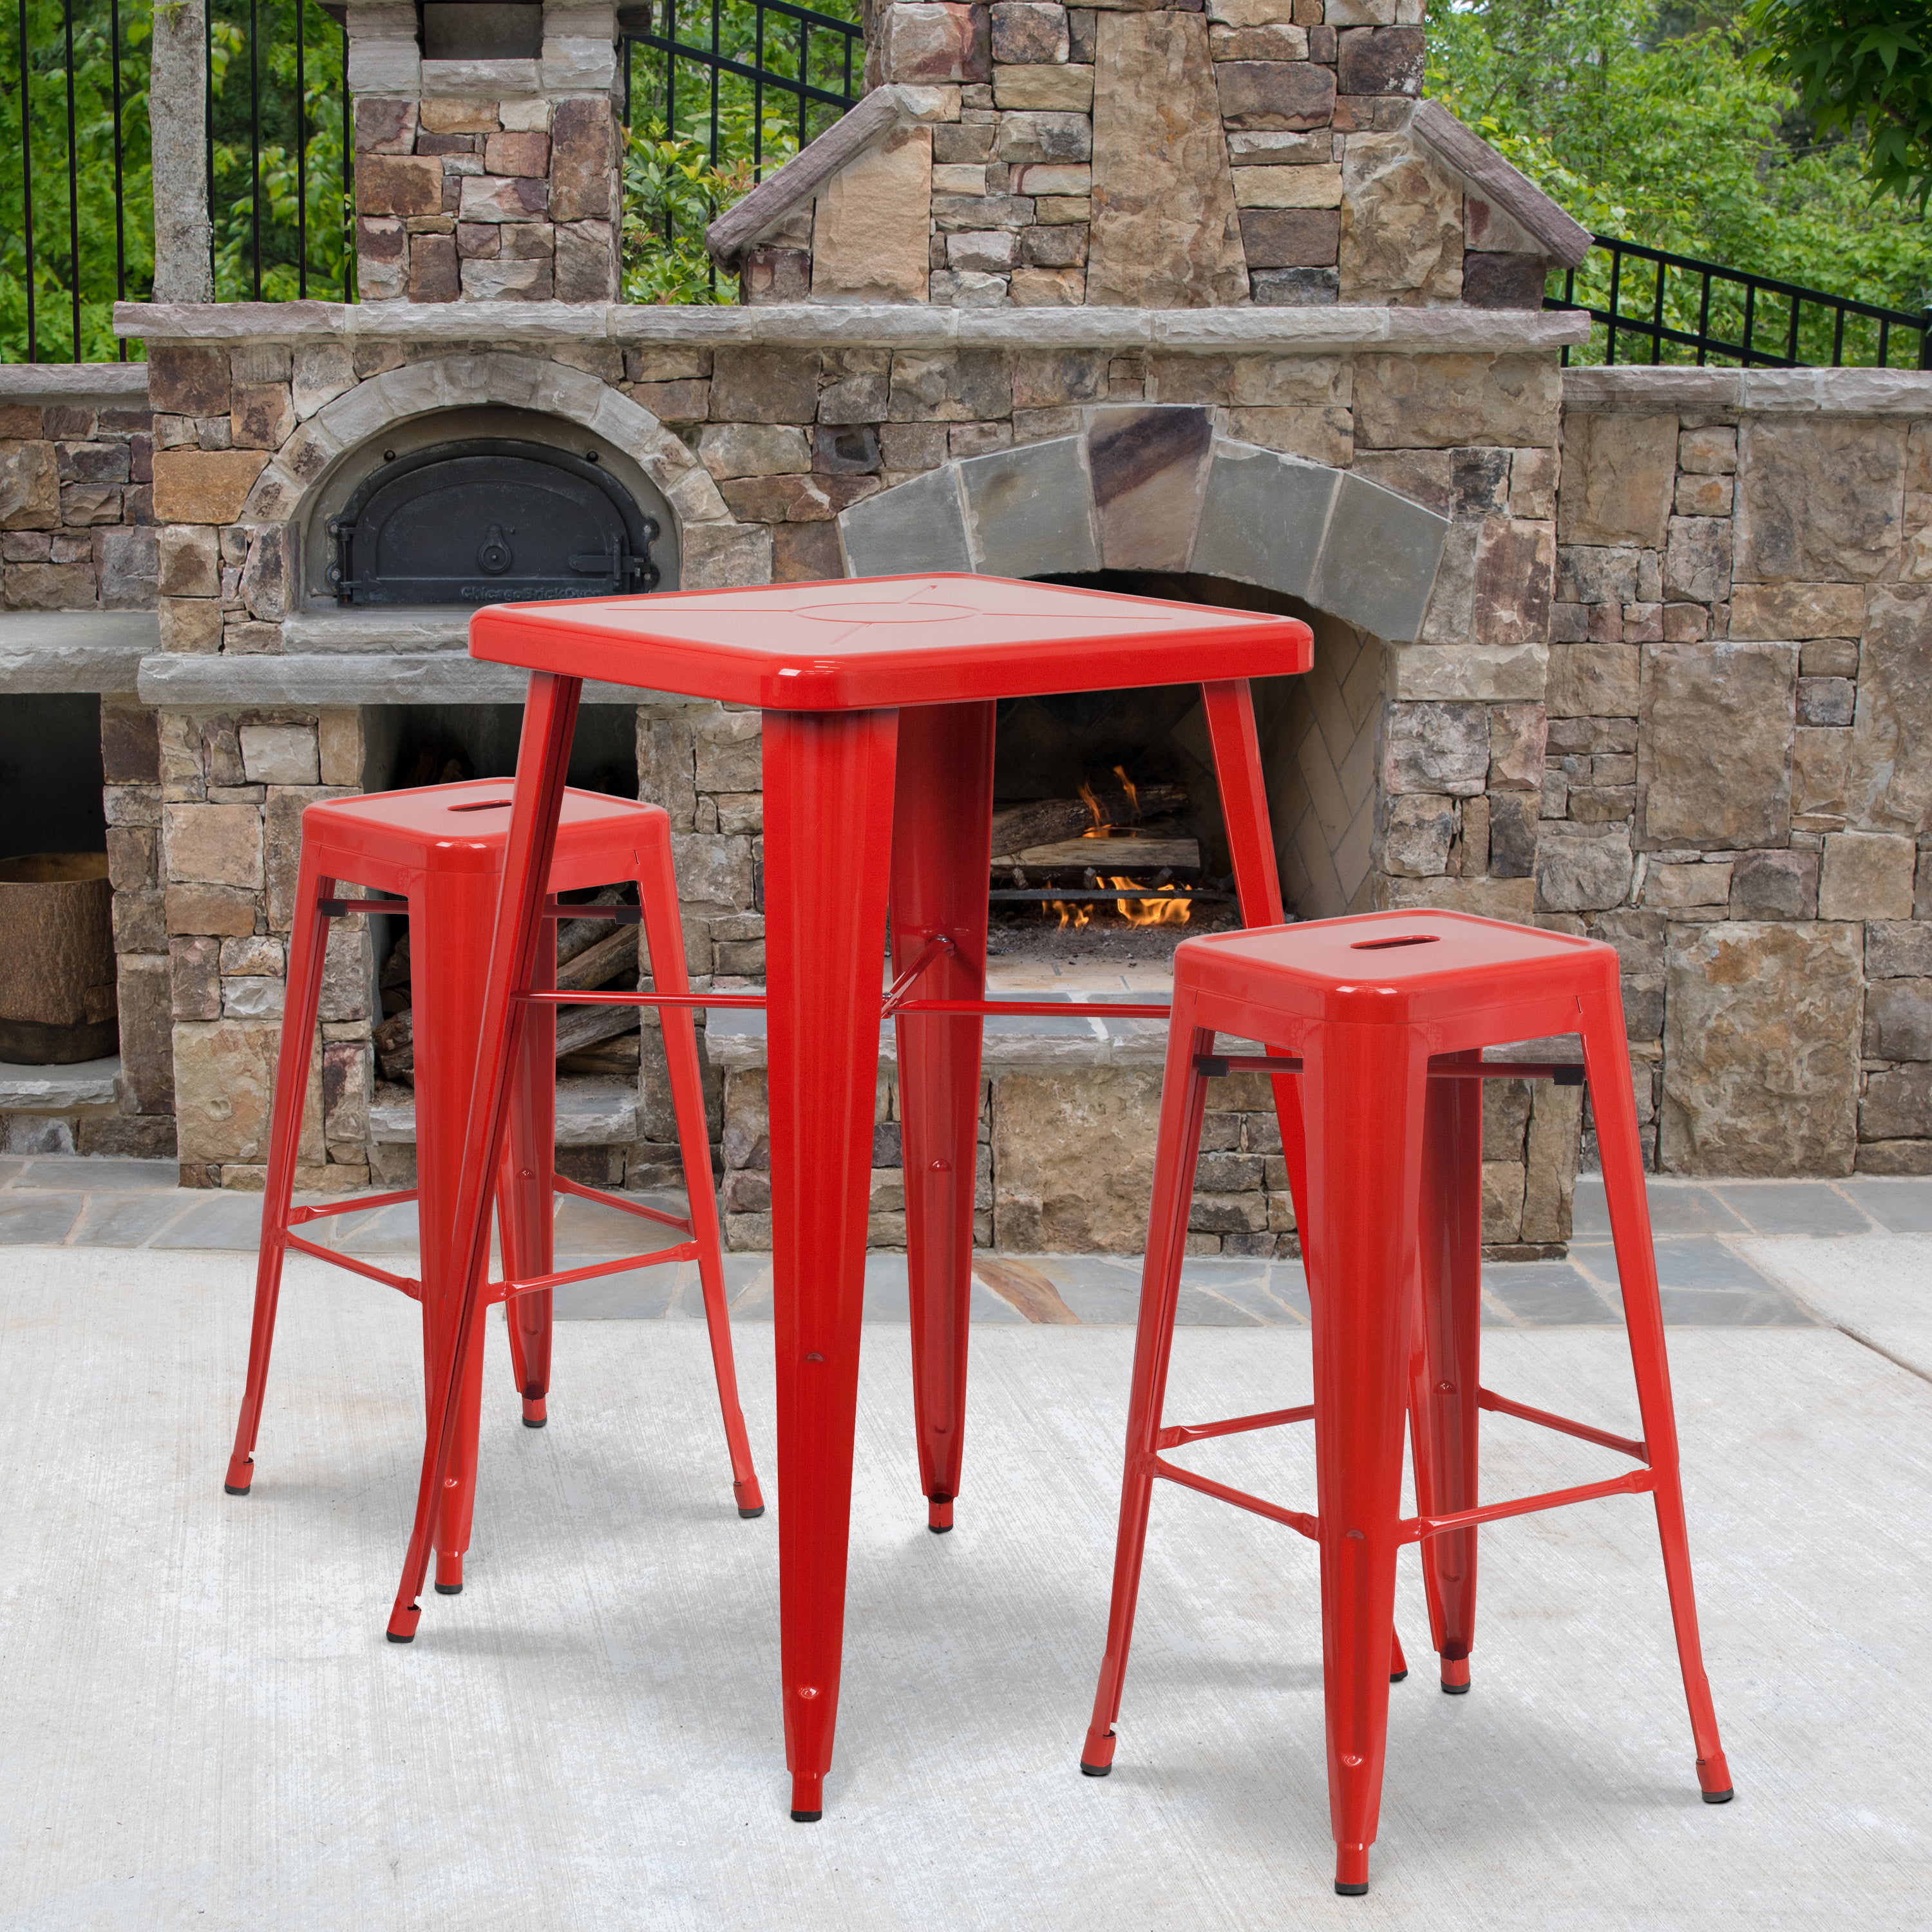 Flash Furniture Commercial Grade 23.75" Square Red Metal Indoor-Outdoor Bar Table Set with 2 Square Seat Backless Stools - image 1 of 5